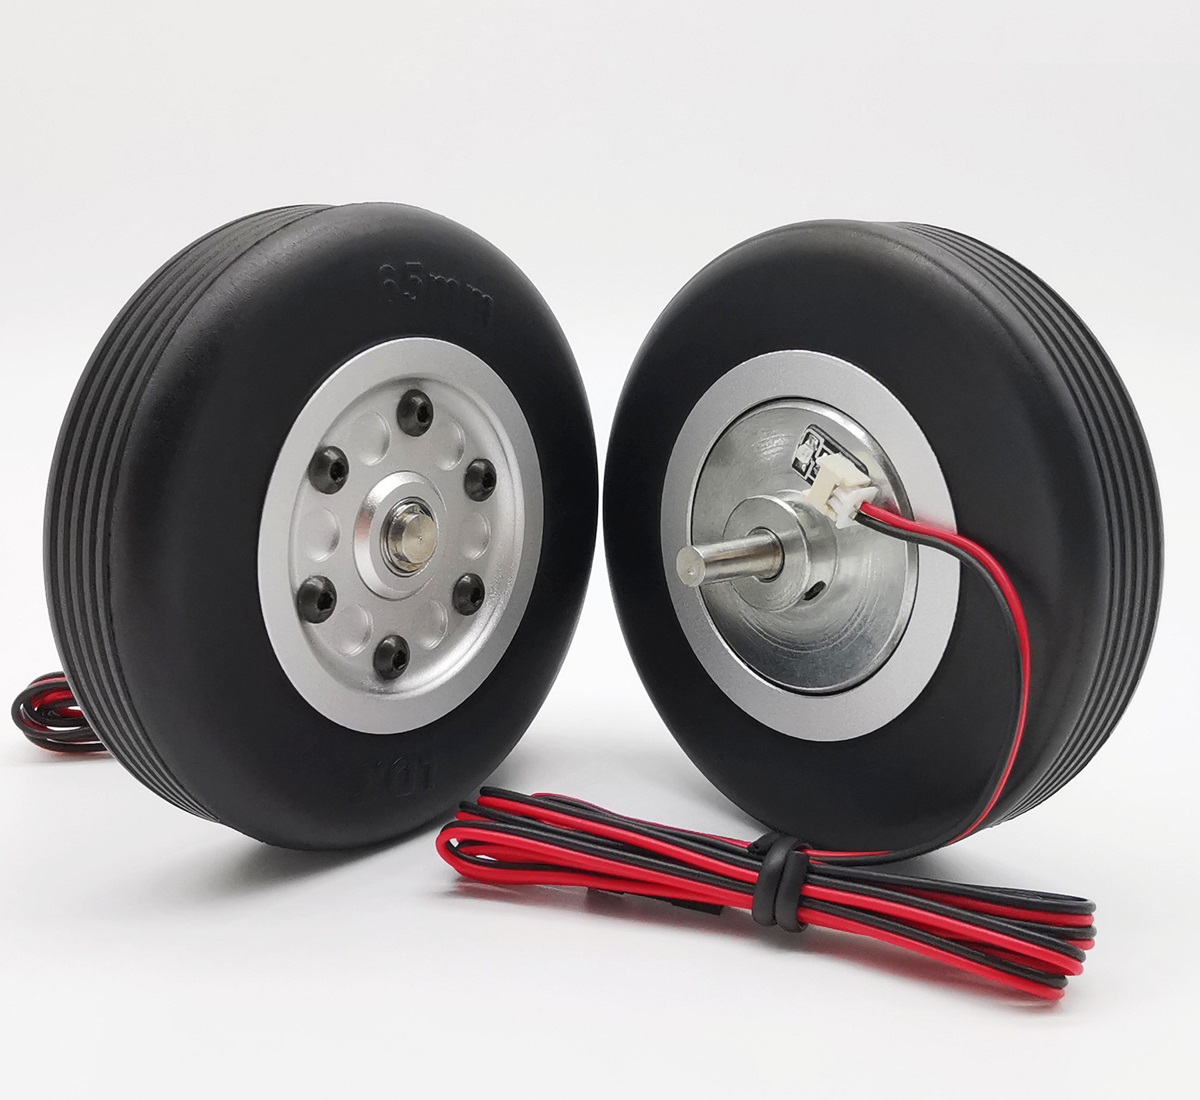  LD Technology Electric Brake System 65mm With 5.0mm Wheel Shaft 